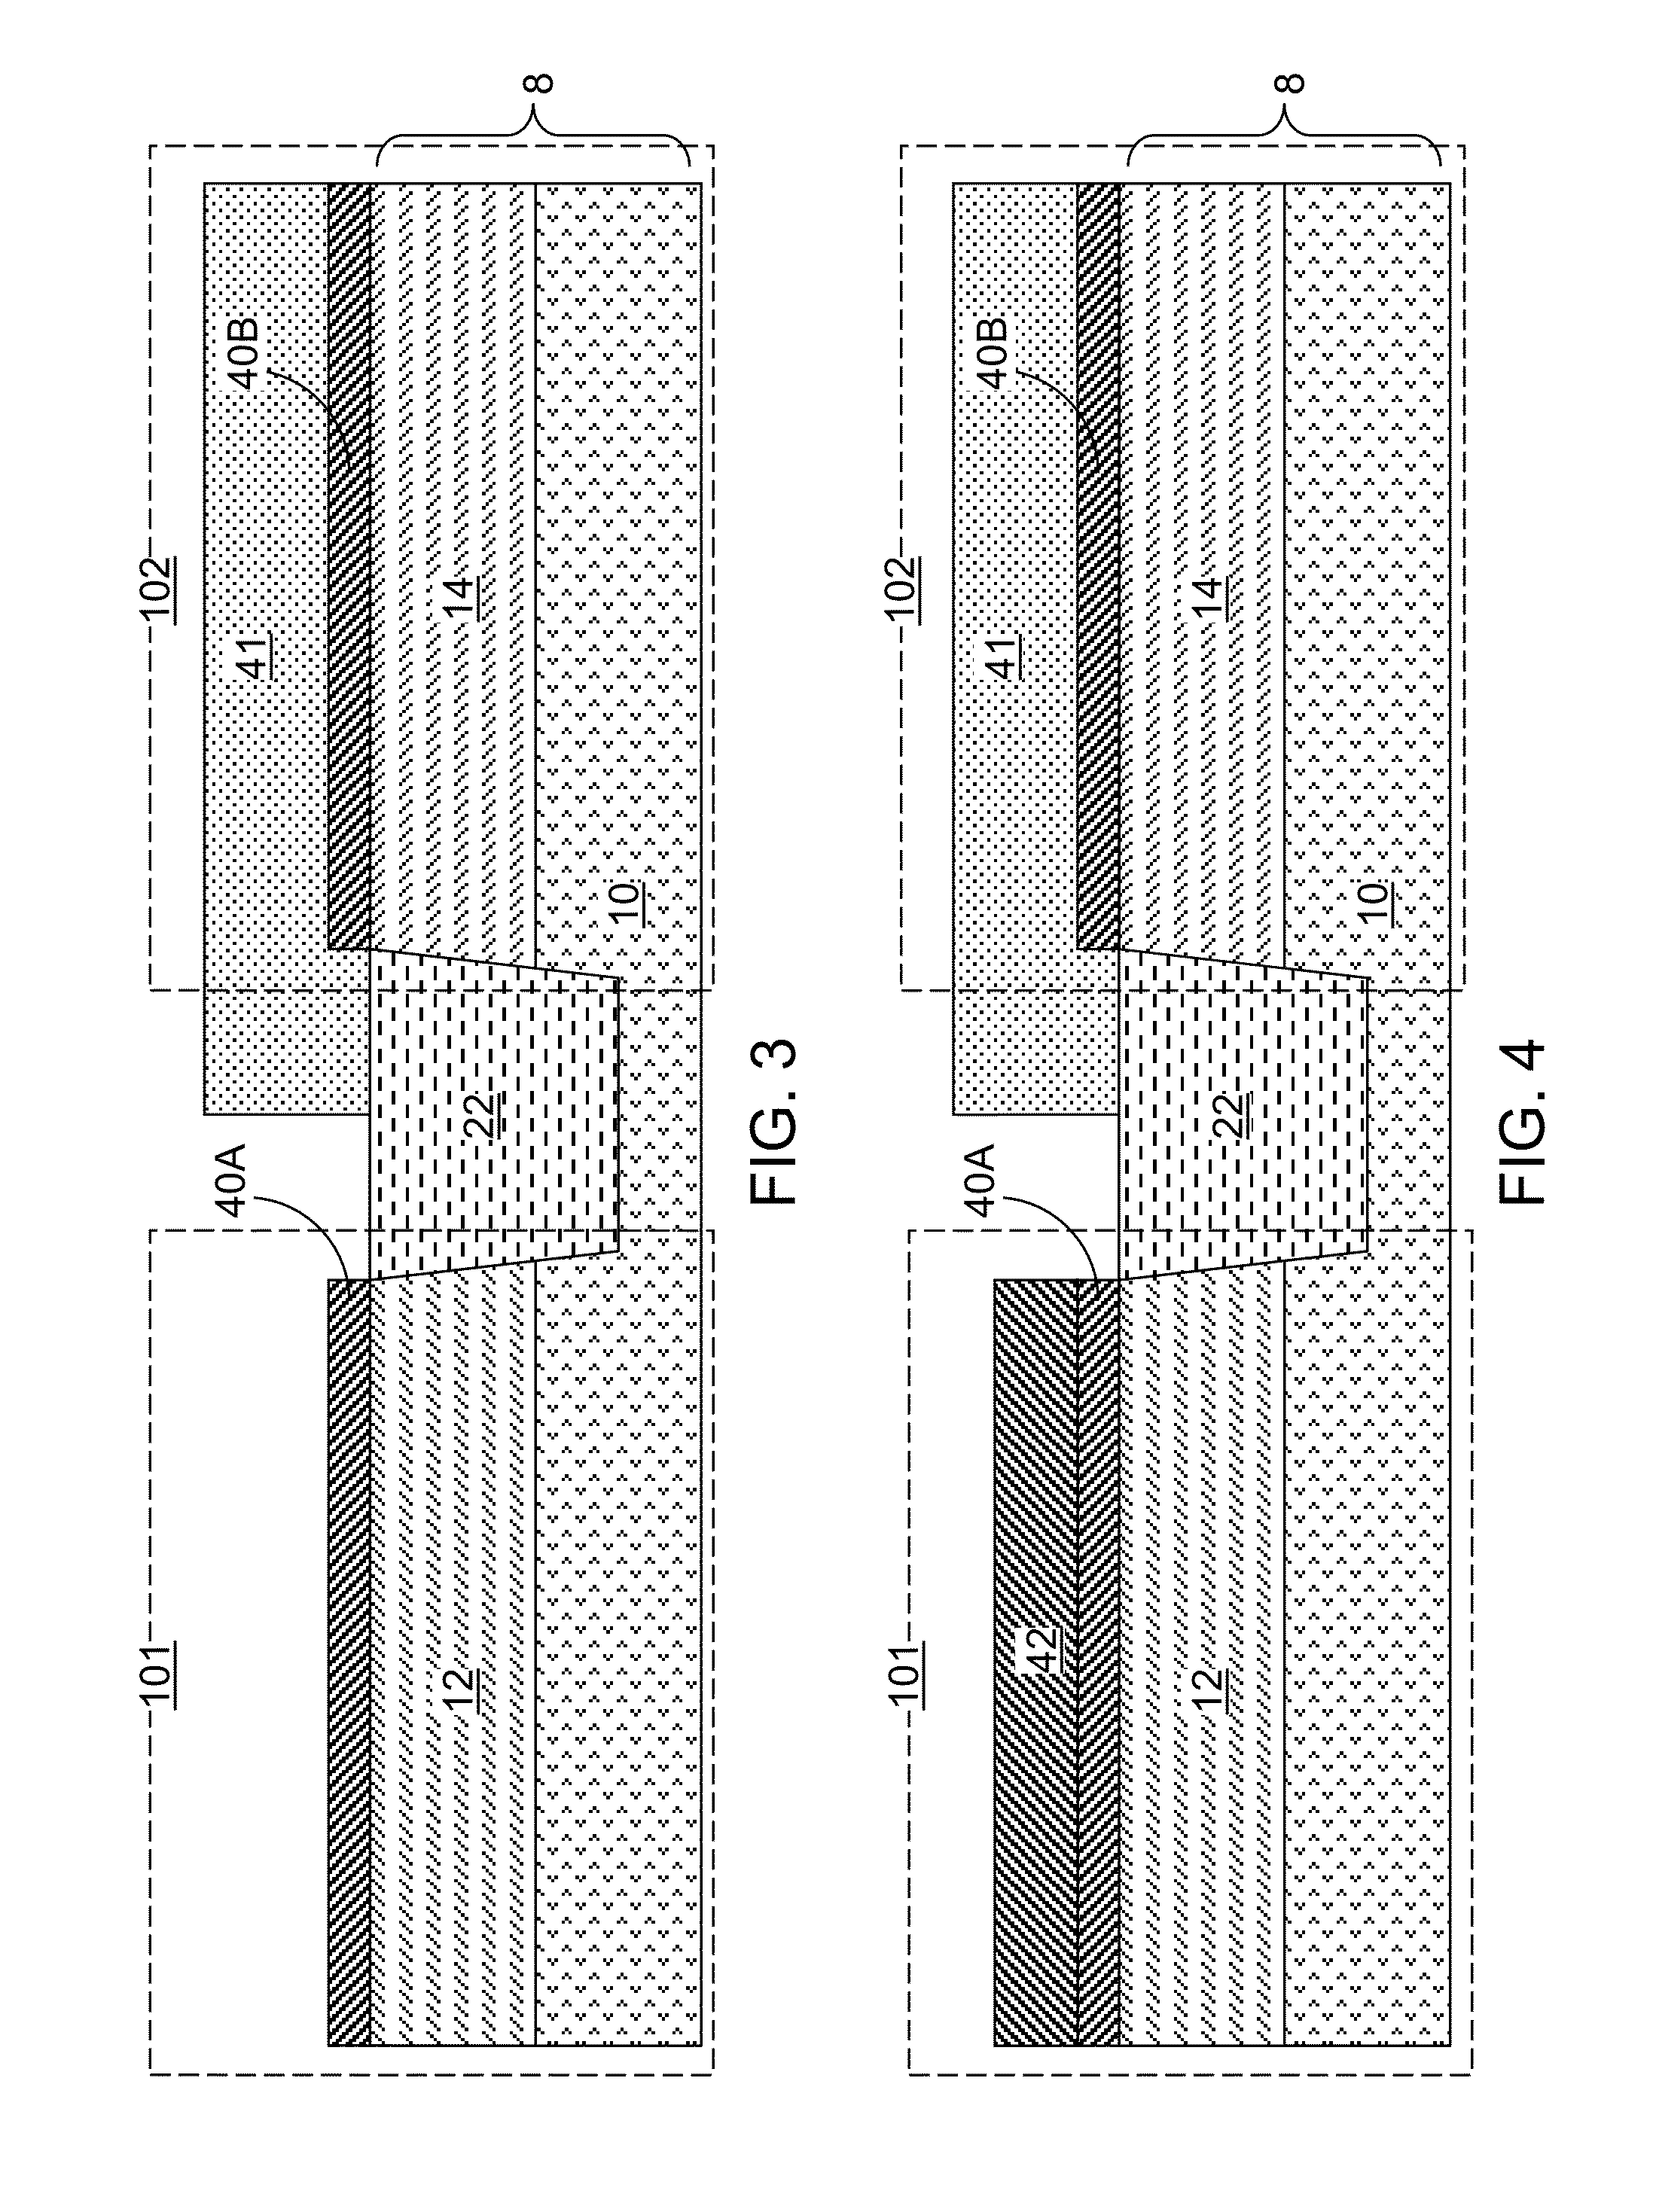 CMOS having a SiC/SiGe alloy stack